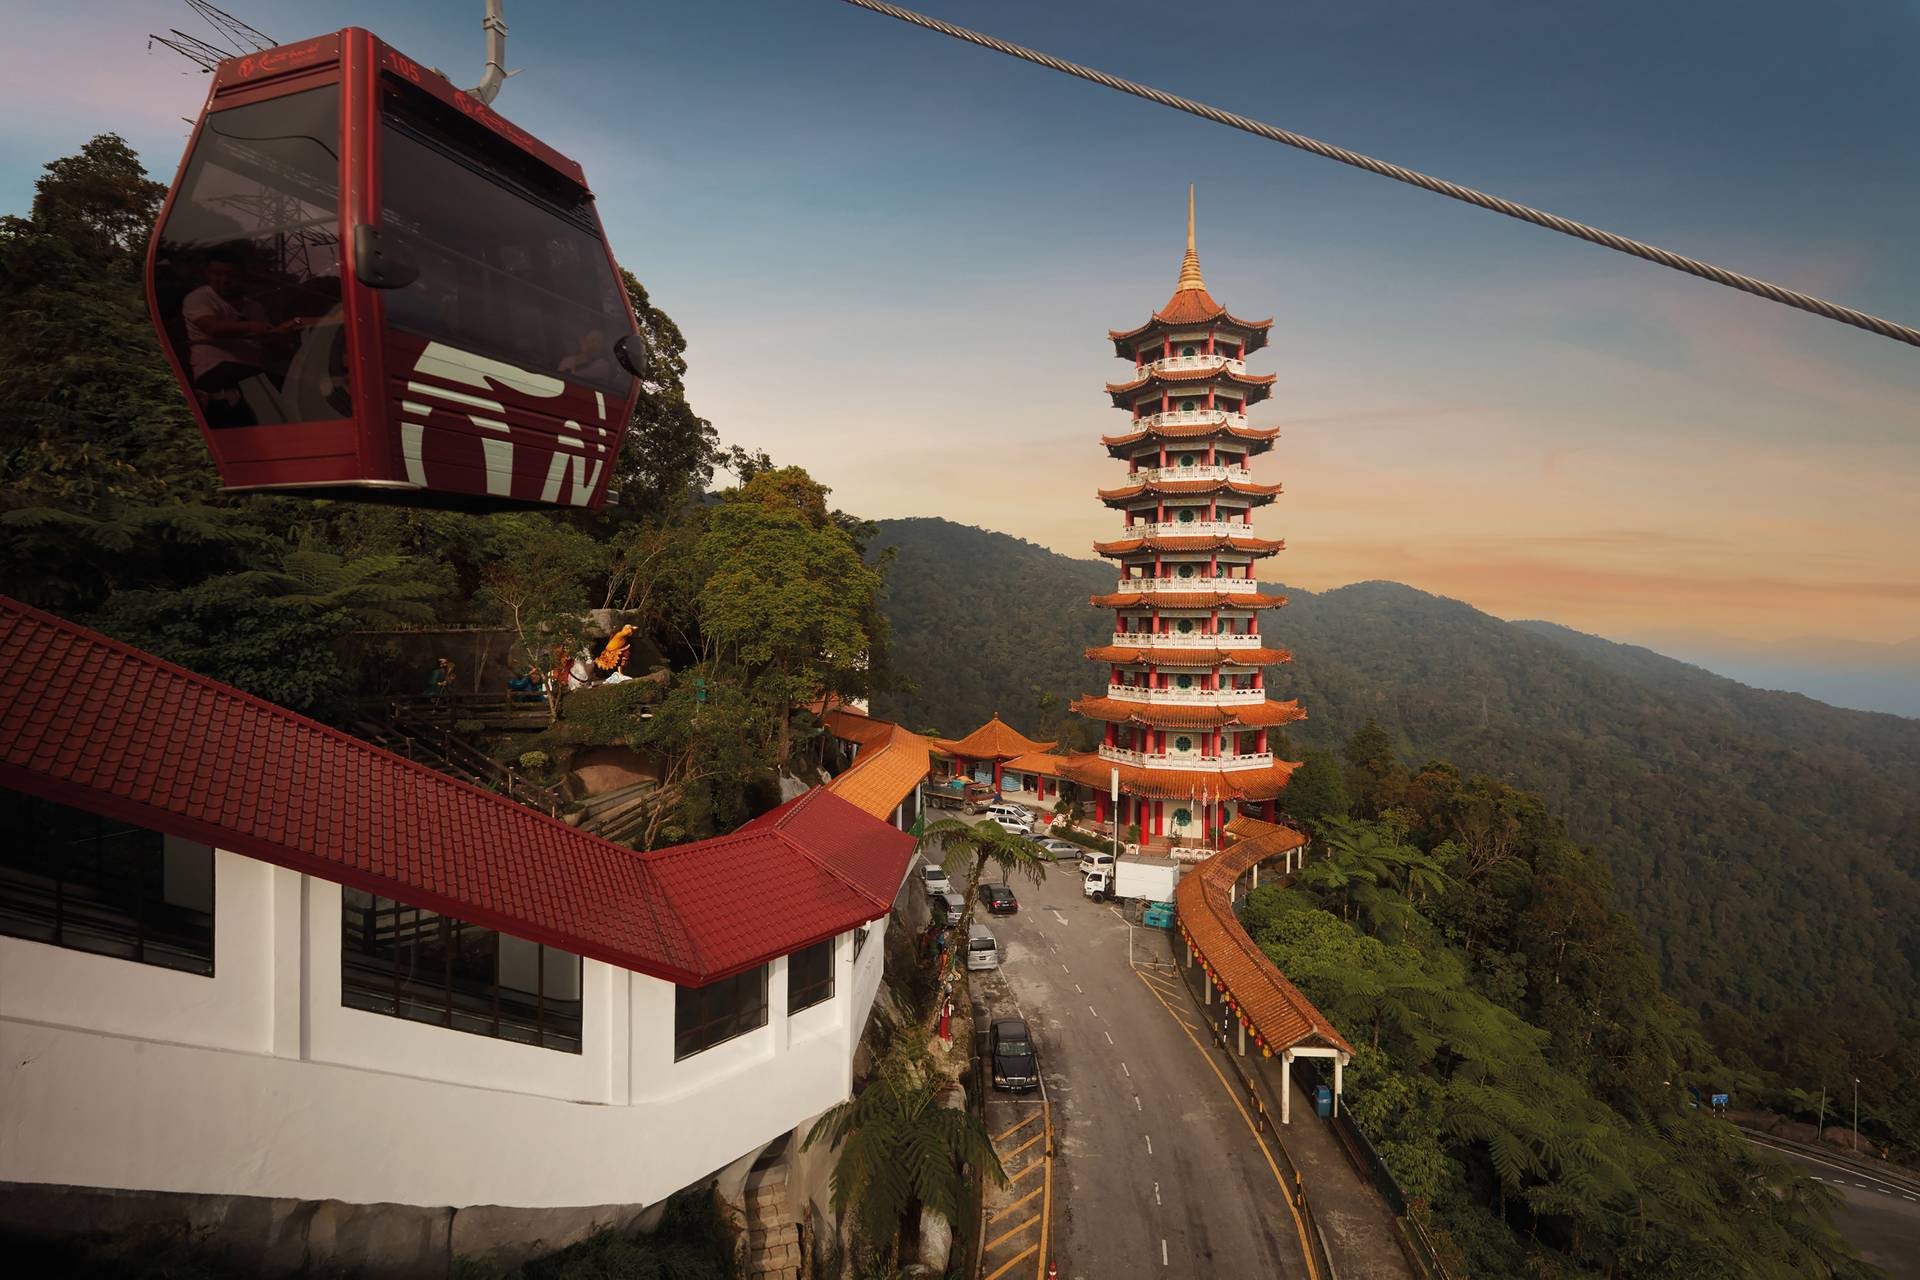 One day tour to Genting Highlands